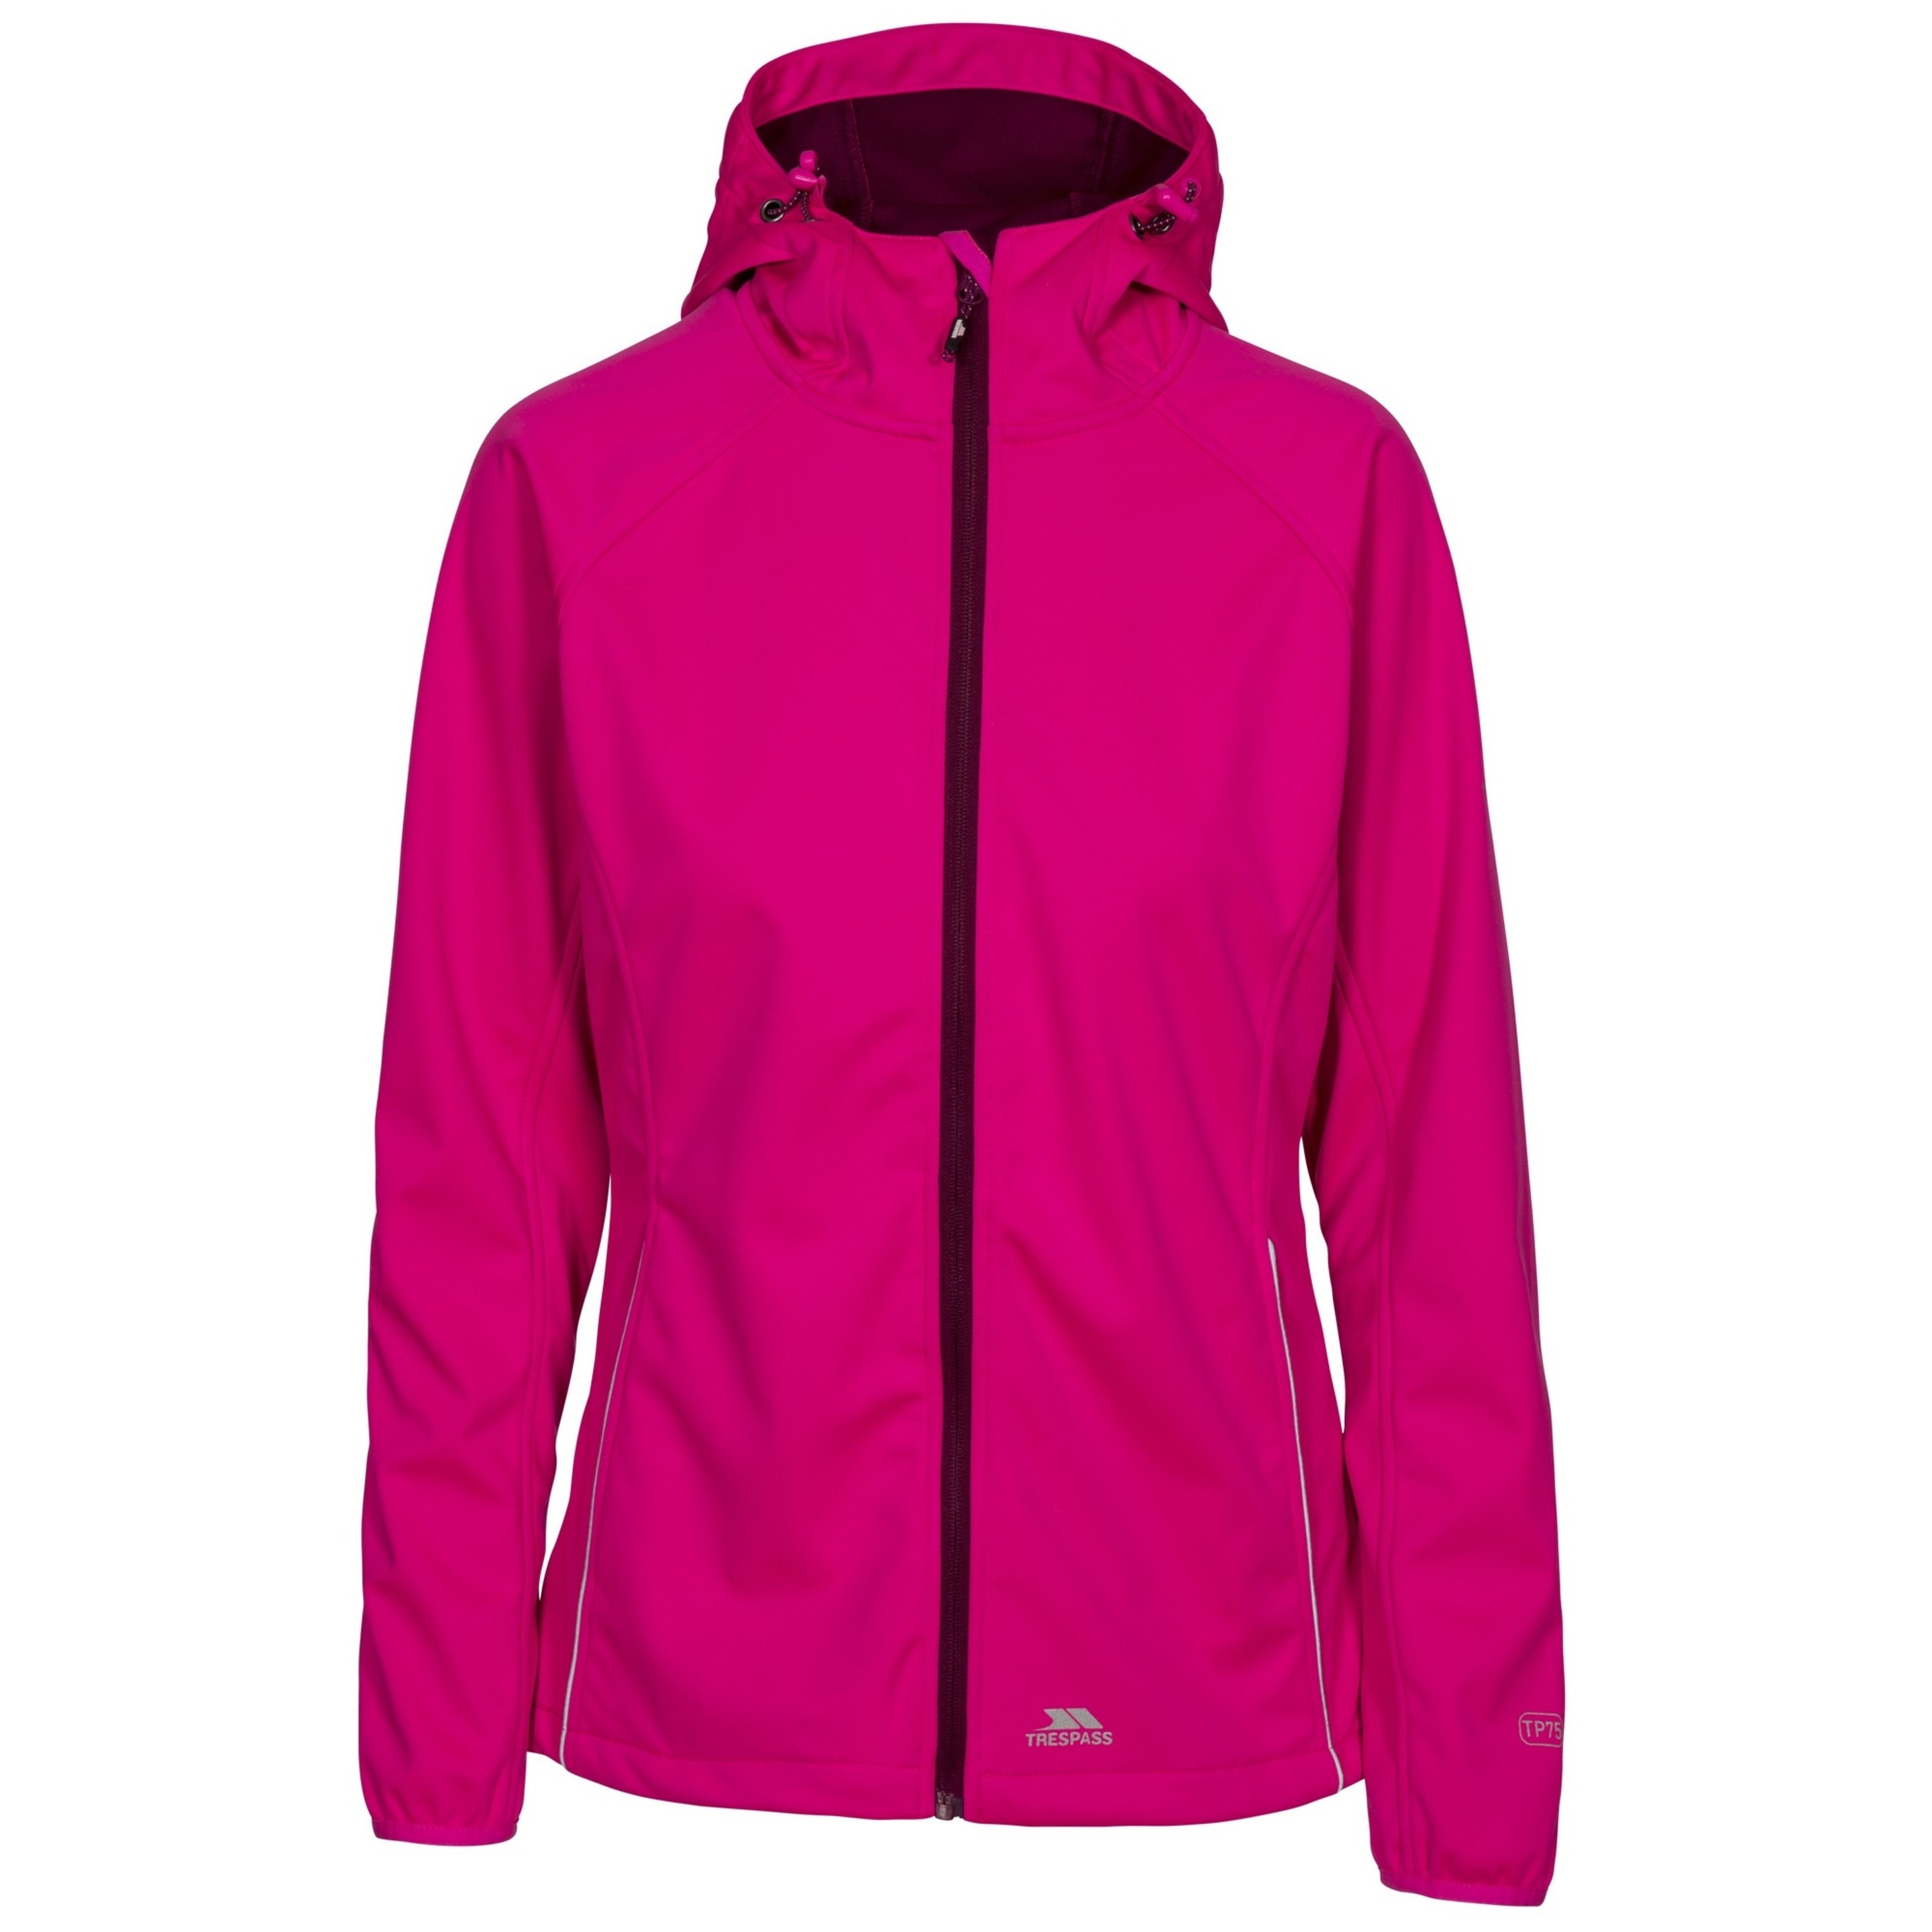 Chaqueta Softshell Impermeable Modelo Sisely Para Mujer Trespass (Gris) - rosa - 